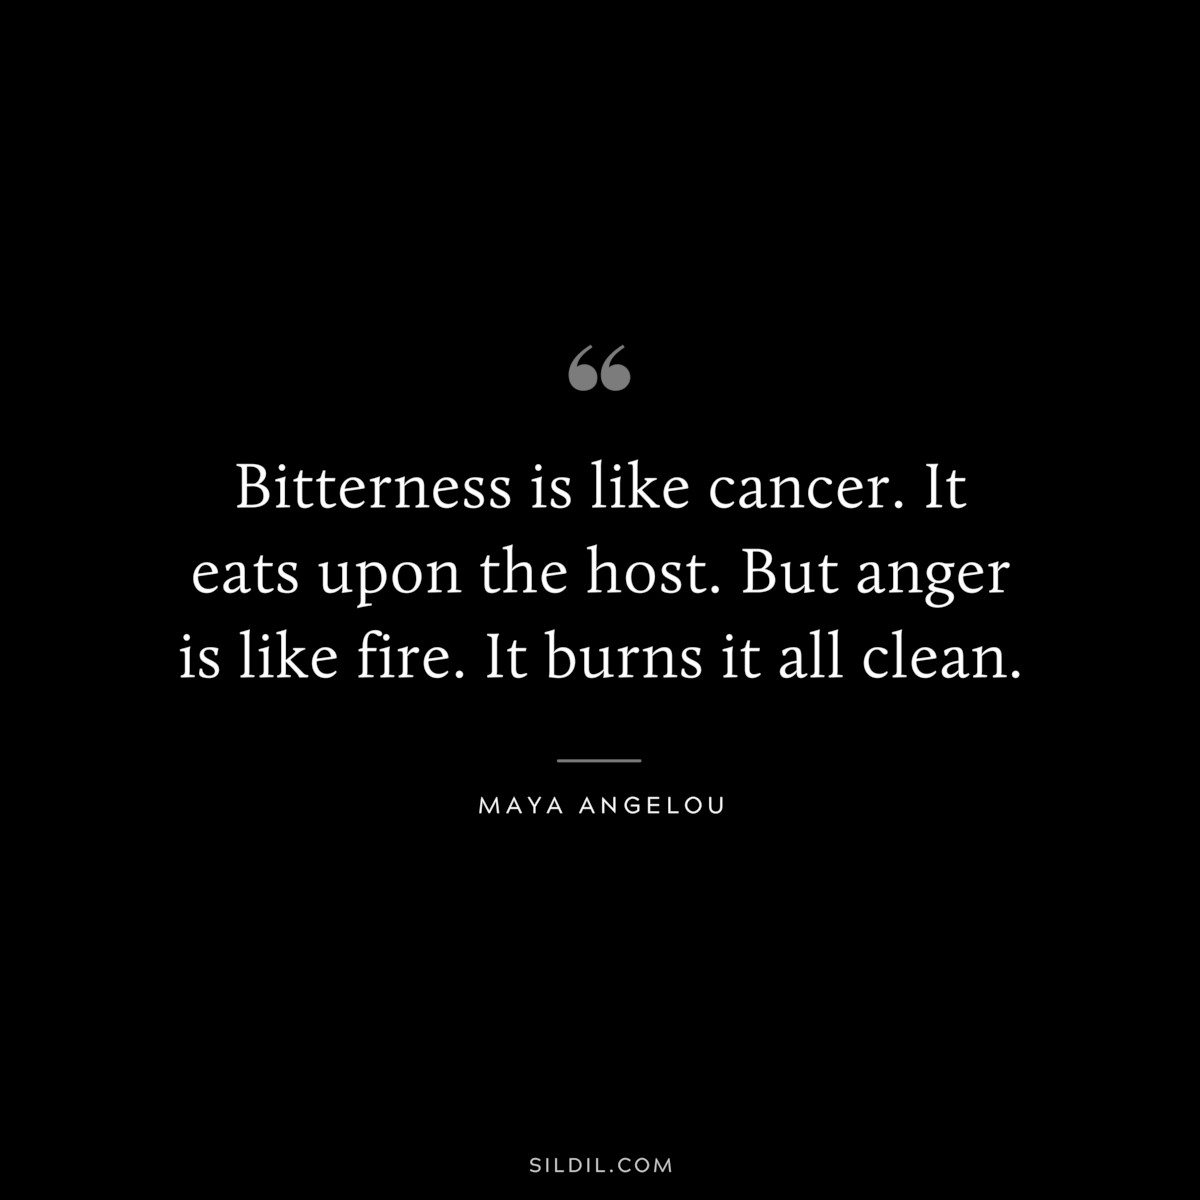 Bitterness is like cancer. It eats upon the host. But anger is like fire. It burns it all clean. ― Maya Angelou